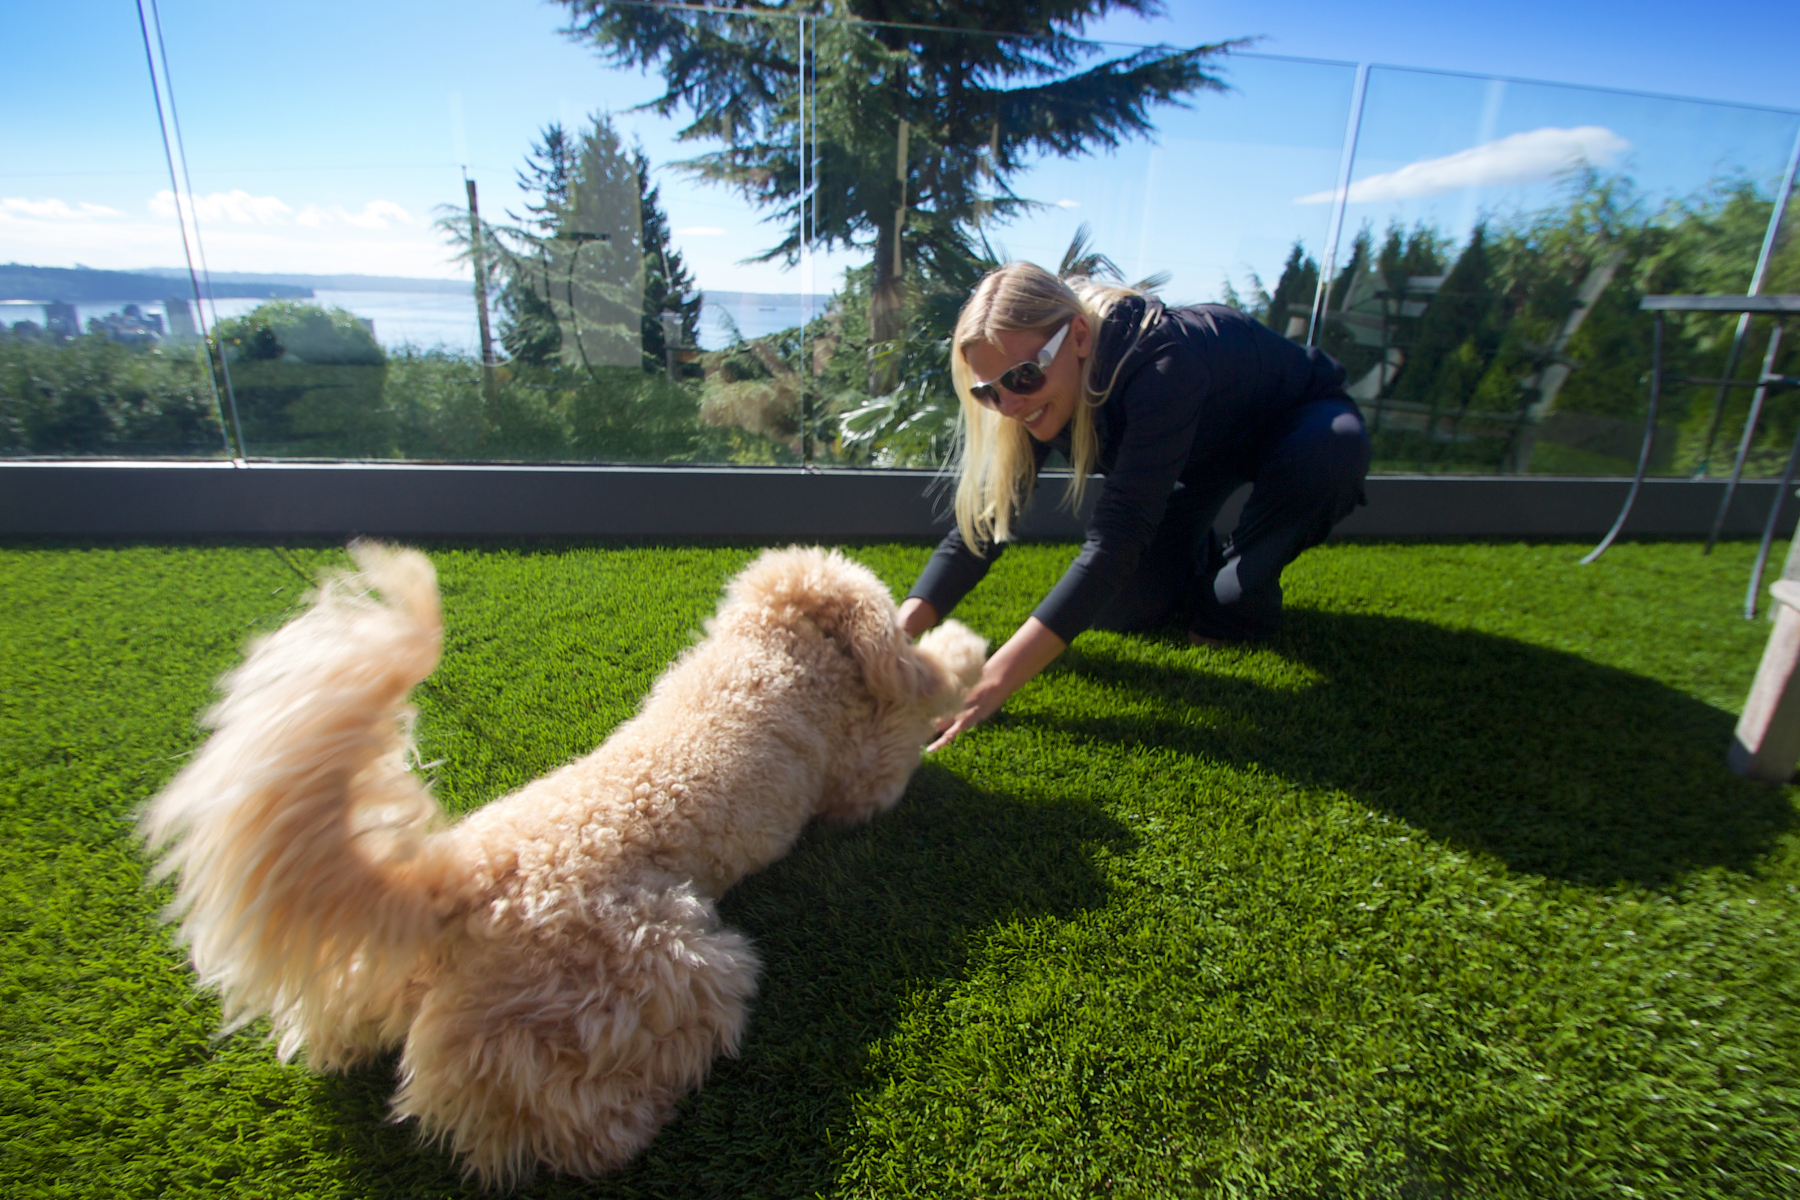 SYNLawn, a manufacturer and installer of synthetic landscape grass, shows an example, for residential use, of a dog playing with a woman in British Colombia, Canada.